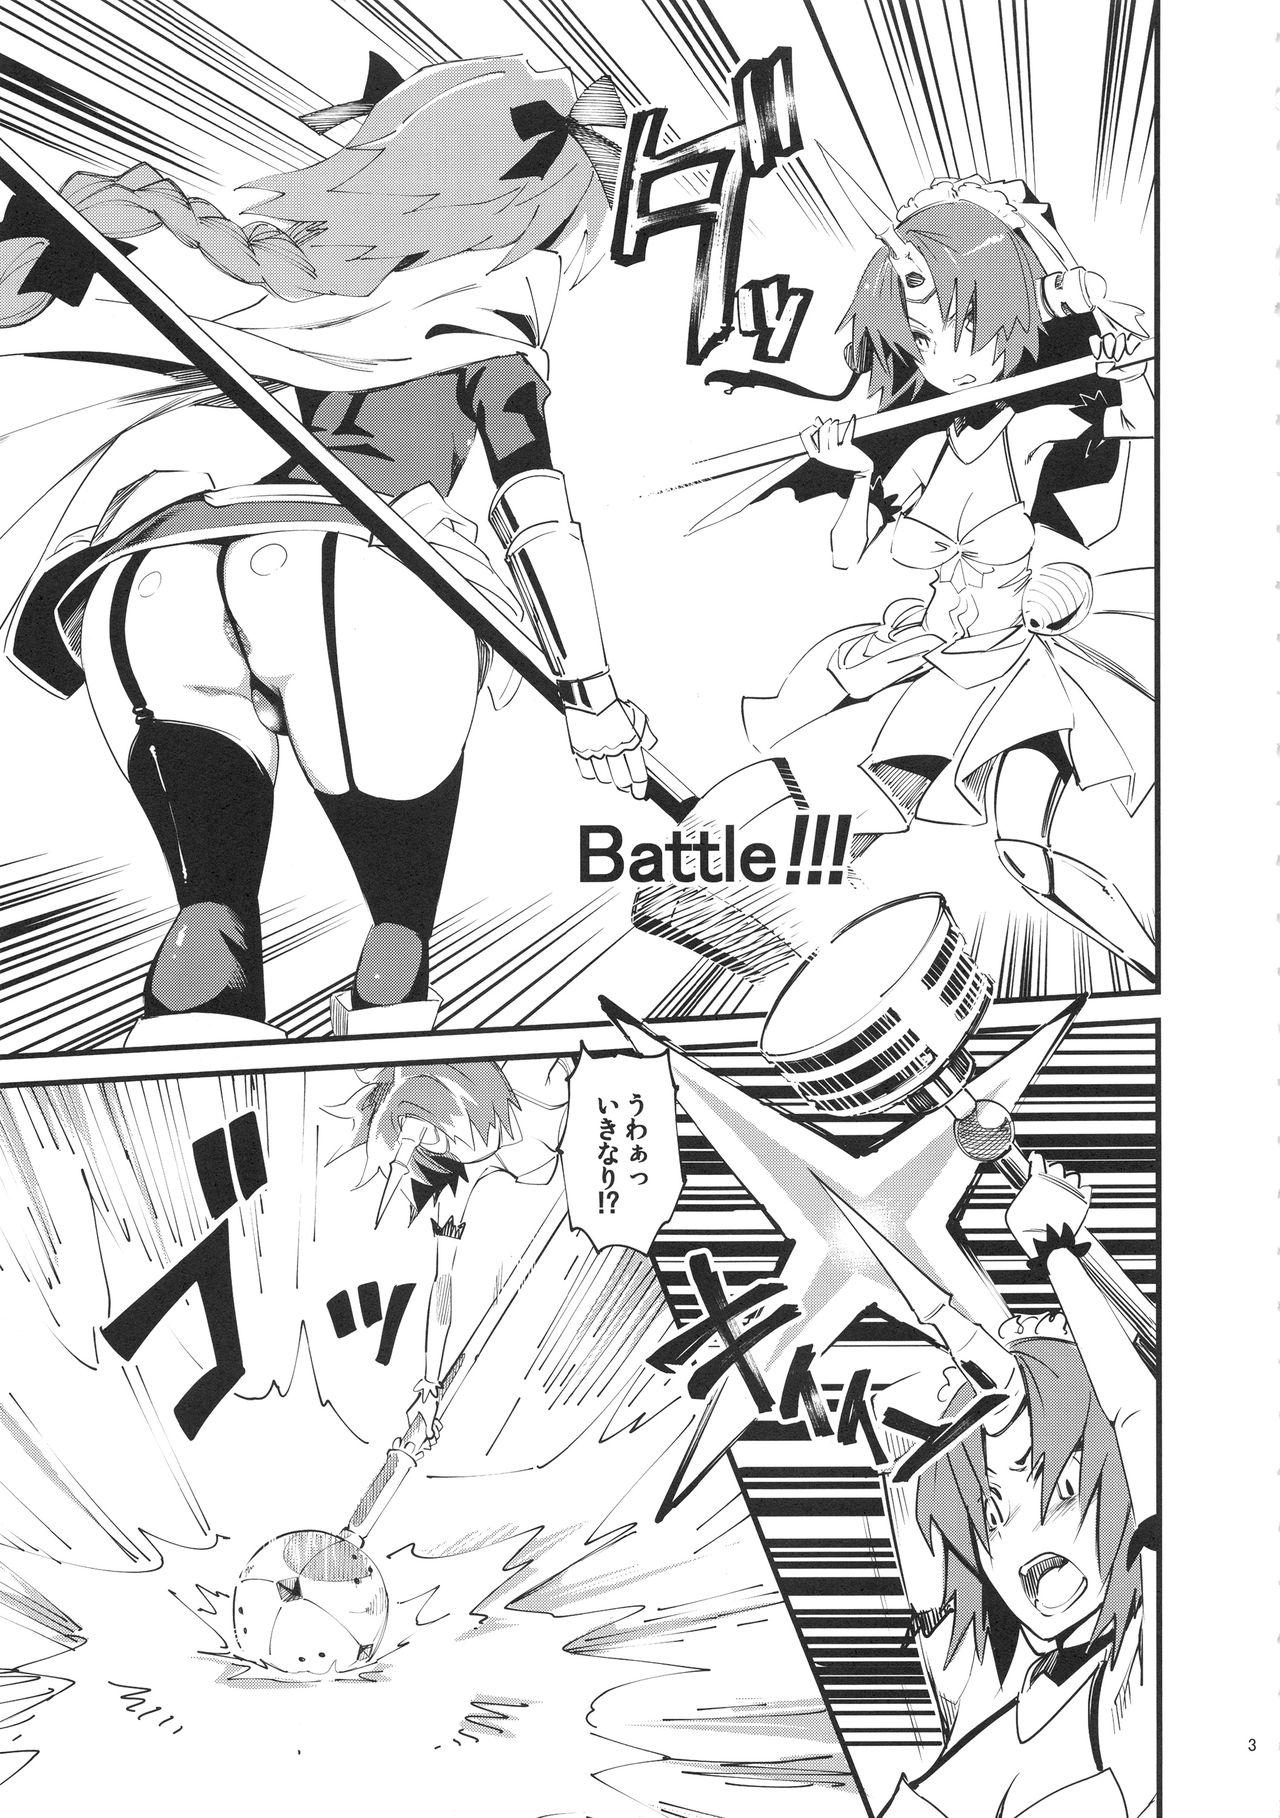 Lesbos CLASS CHANGE!! Brave Astolfo - Fate apocrypha Lick - Page 4